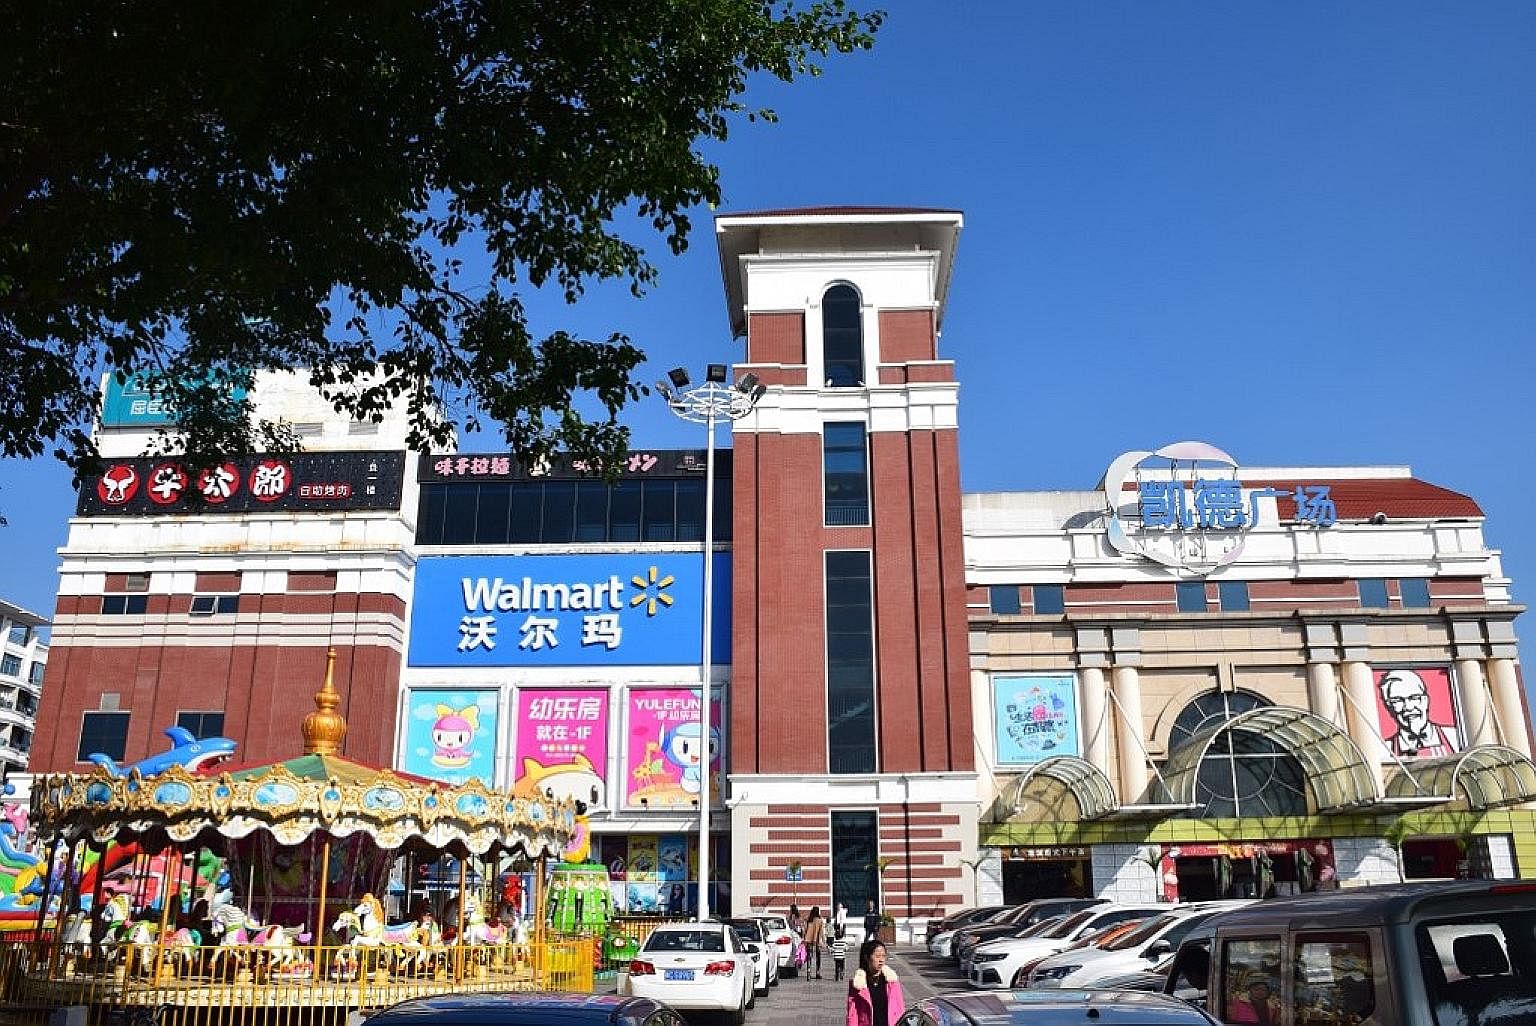 CapitaMall Quanzhou in Quanzhou, Fujian province, one of the 20 Chinese malls developer CapitaLand is offloading.